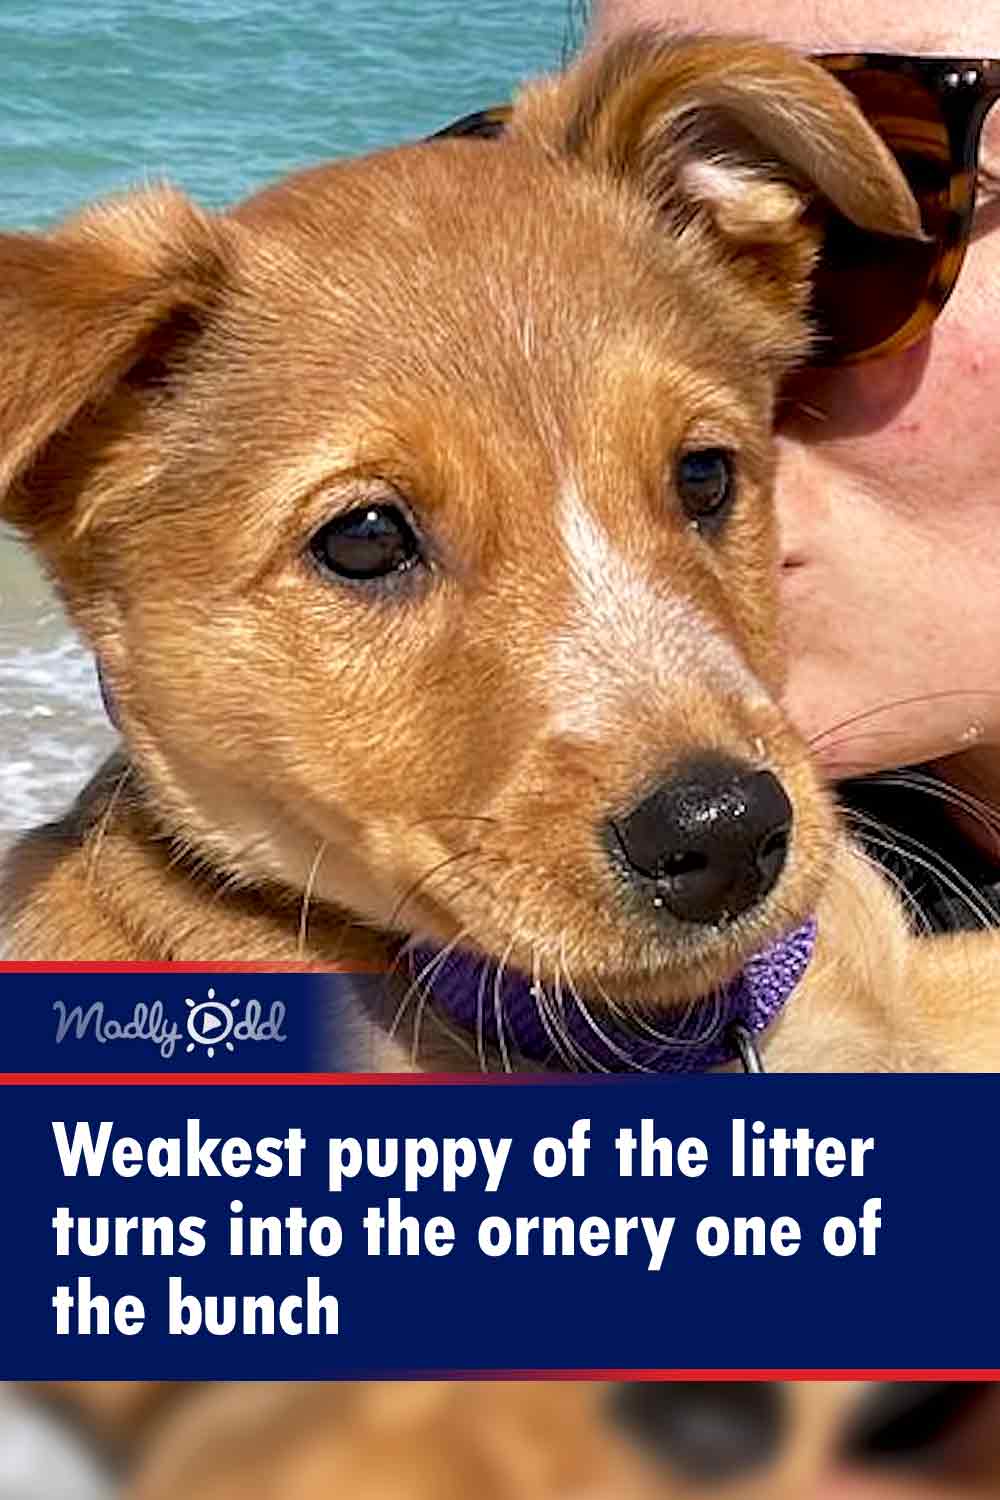 Weakest puppy of the litter turns into the ornery one of the bunch